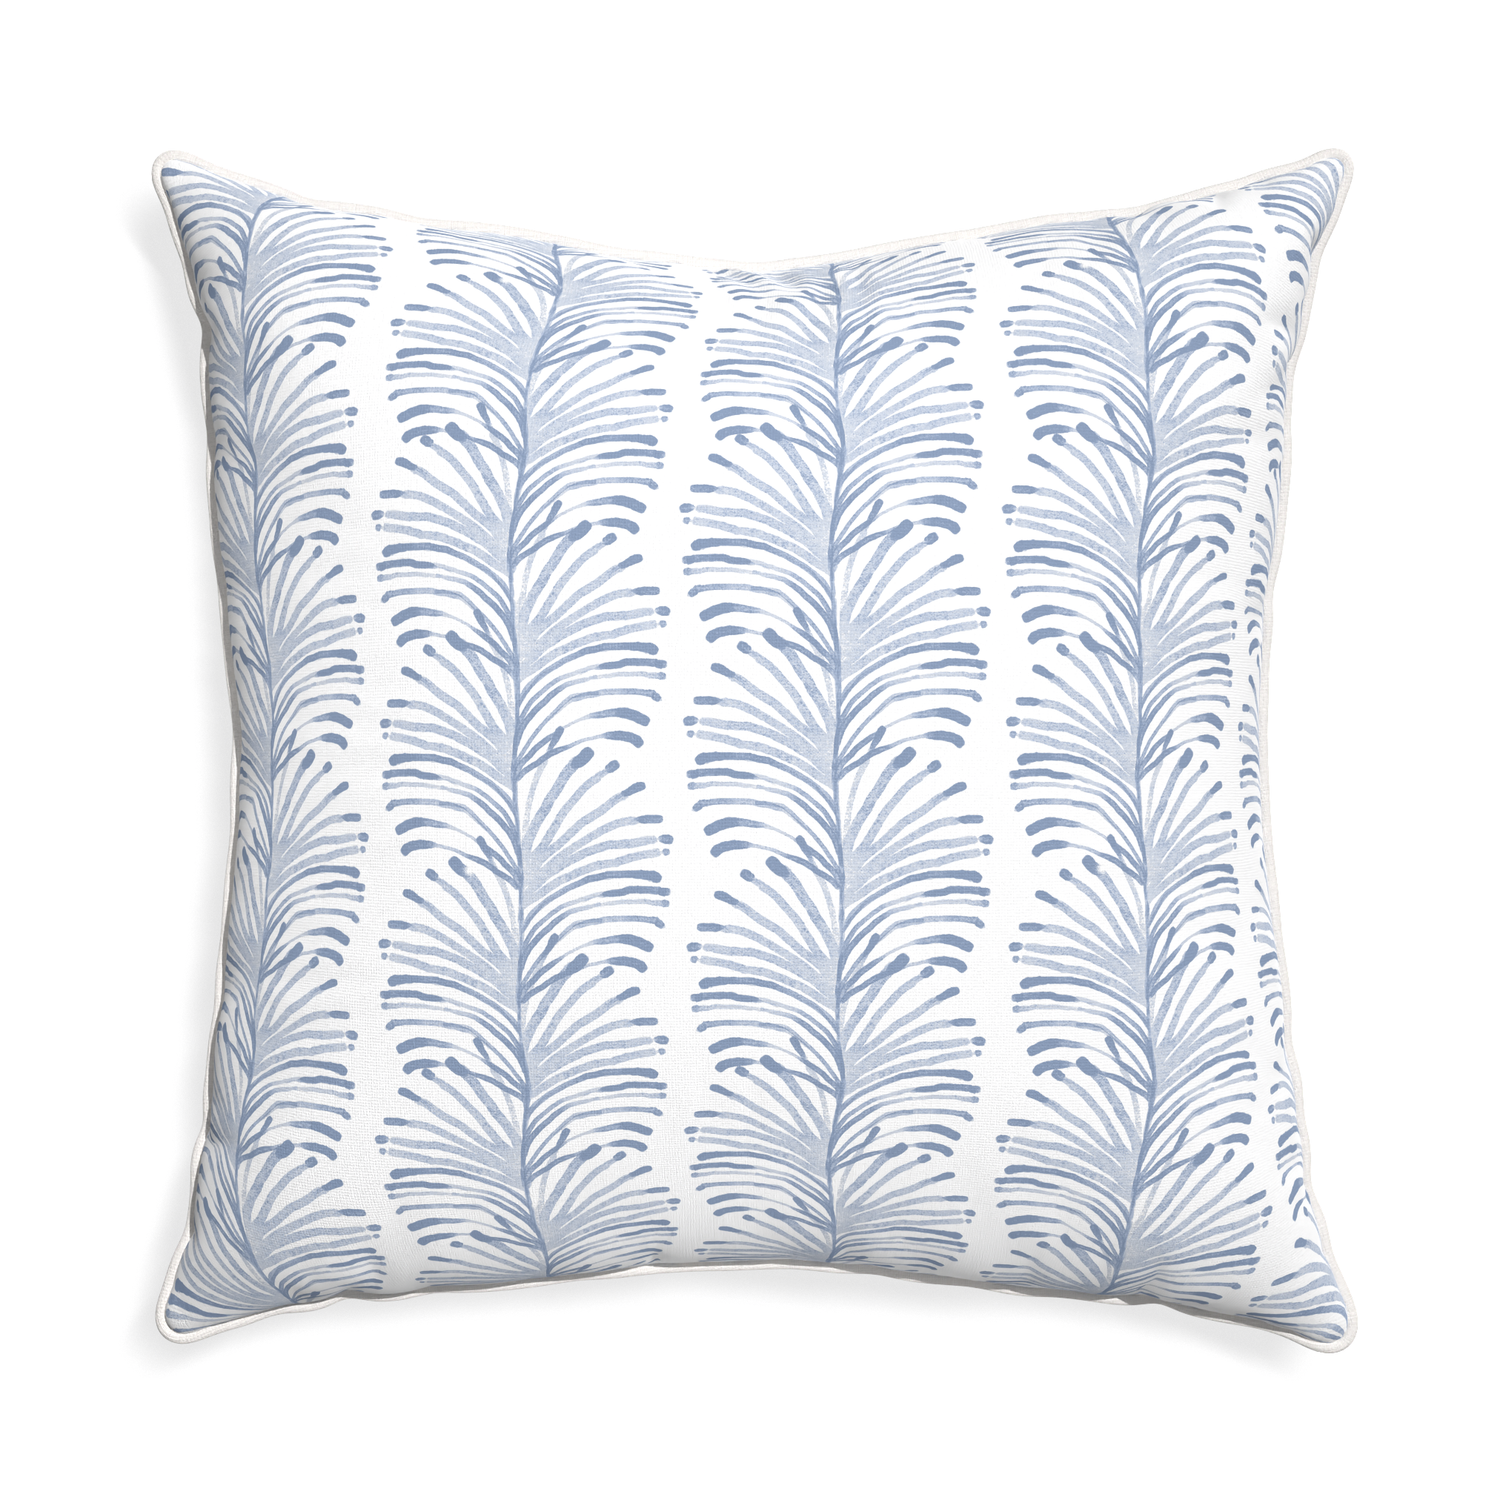 Euro-sham emma sky custom pillow with snow piping on white background